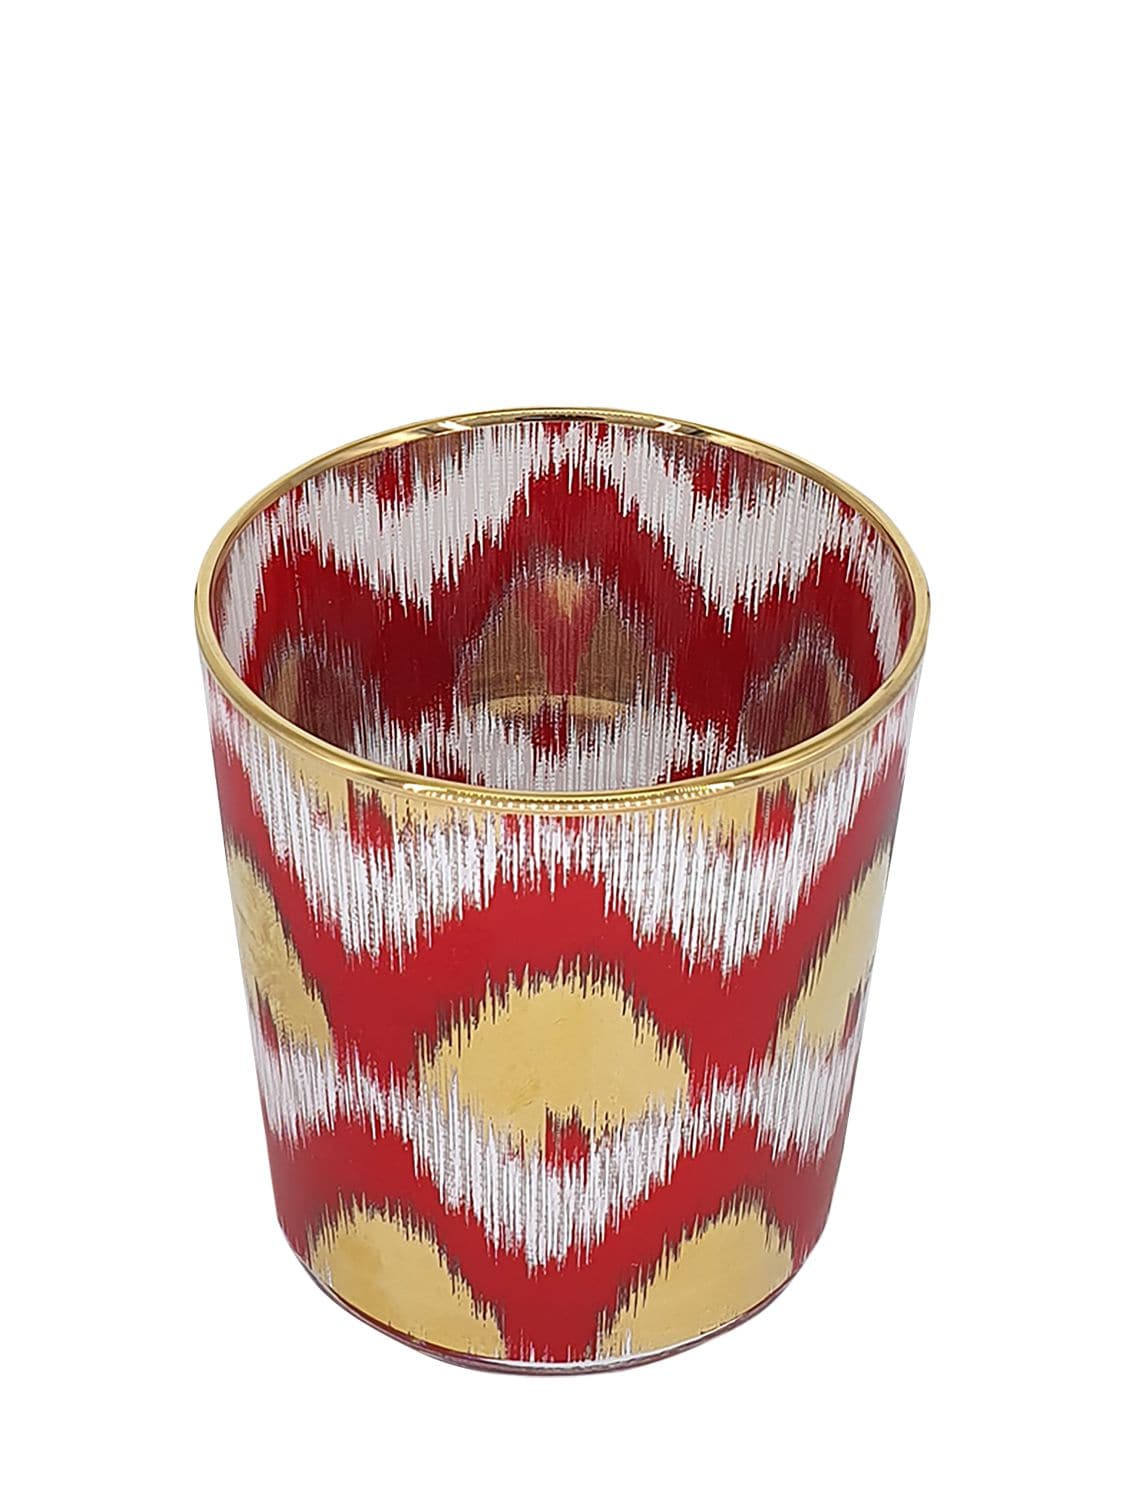 Les Ottomans Ikat Gold杯子4个套装 In Gold,red